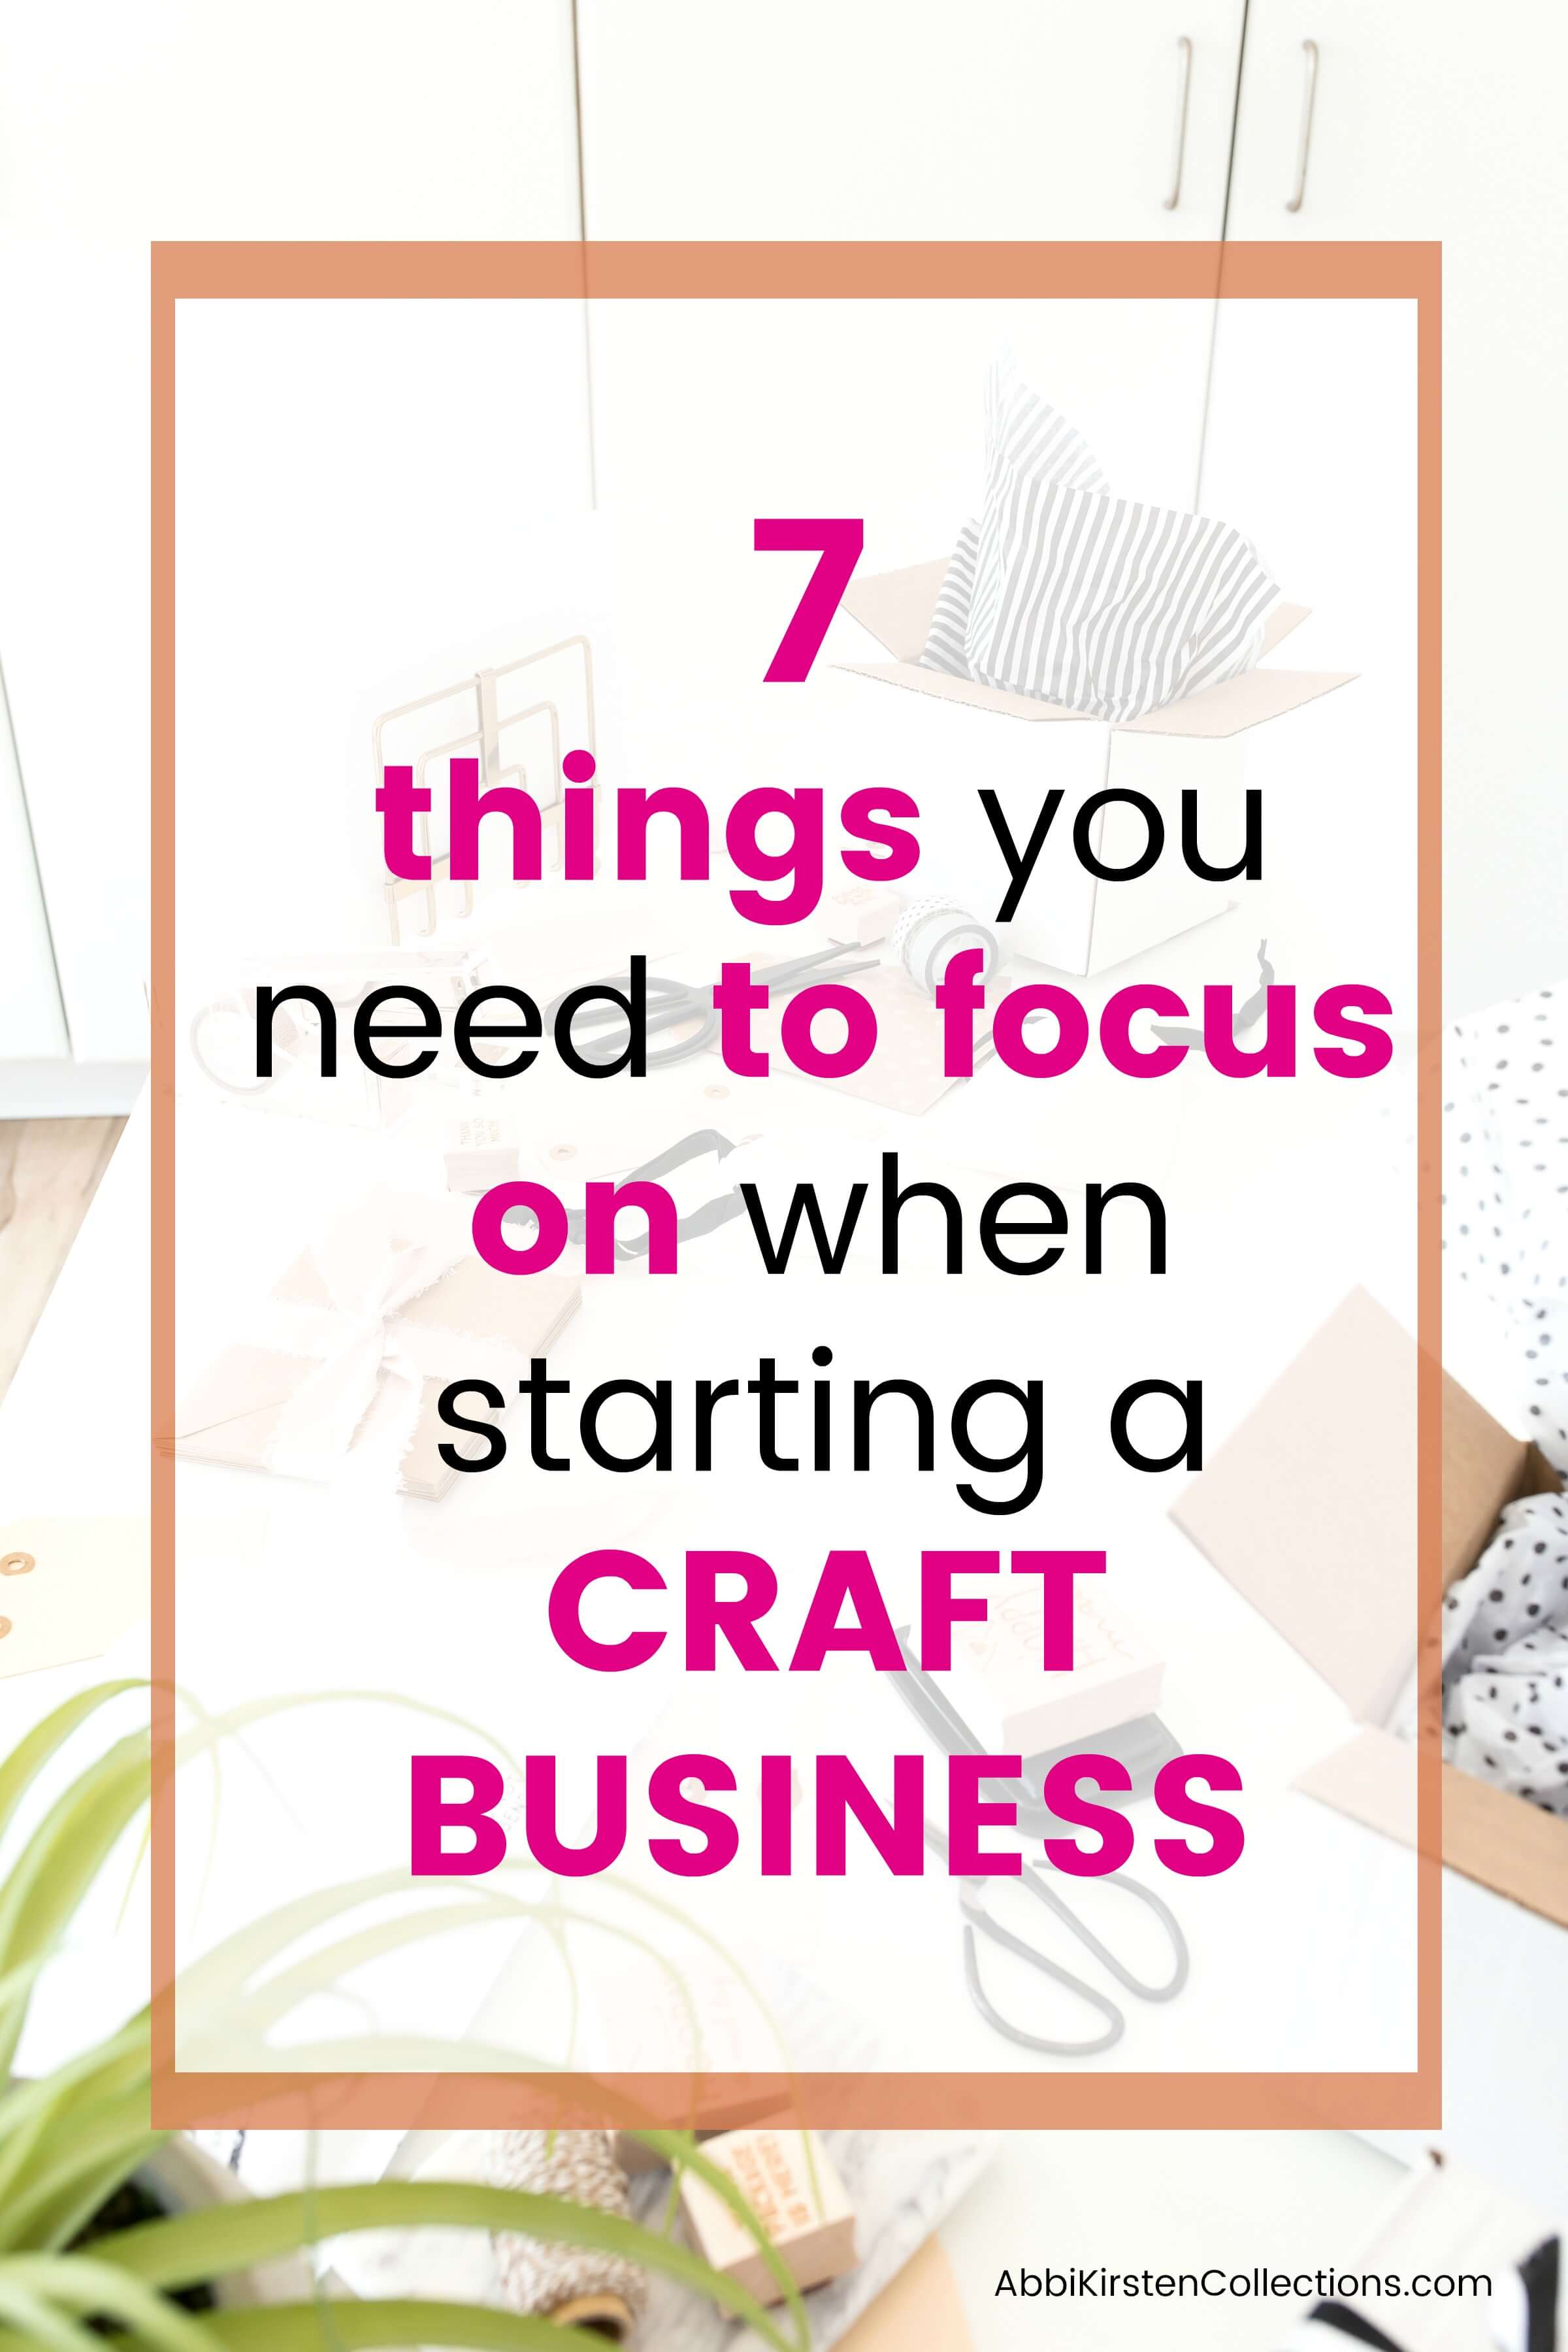 A background image of a cluttered desk, filled with crafting supplies lix scissors and tape, and boxes filled with fabrics. Text overlayed on the image says "7 things you need to focus on when starting a craft business"